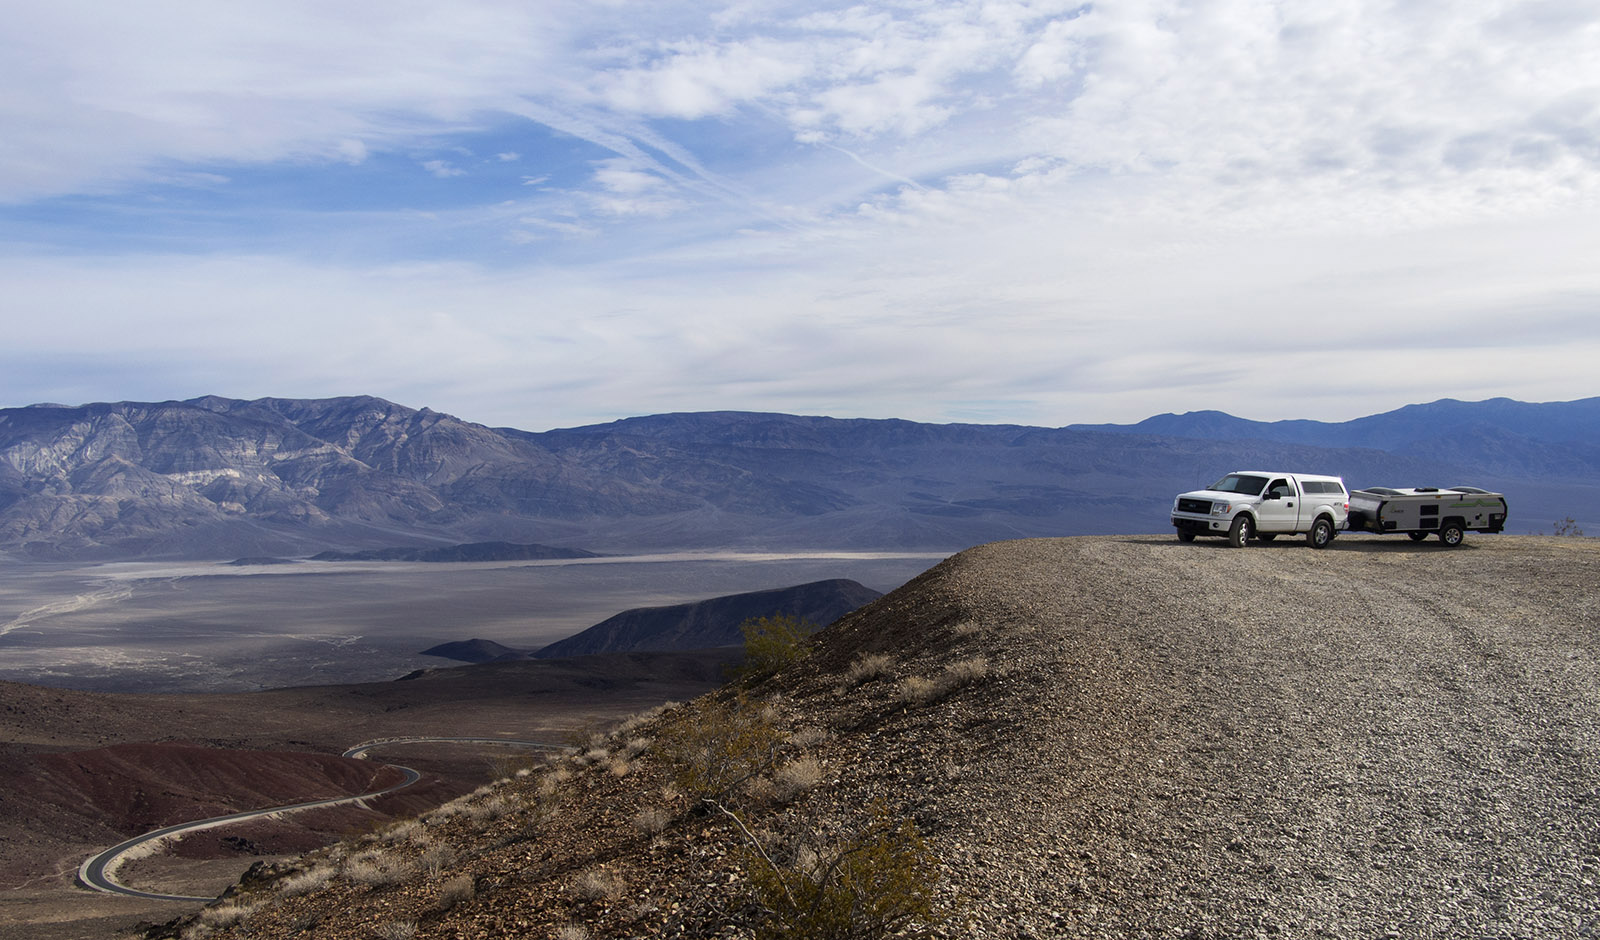 Parked at Father Crowley Vista Point with Panamint Valley below and Panamint Mountains in the distance.